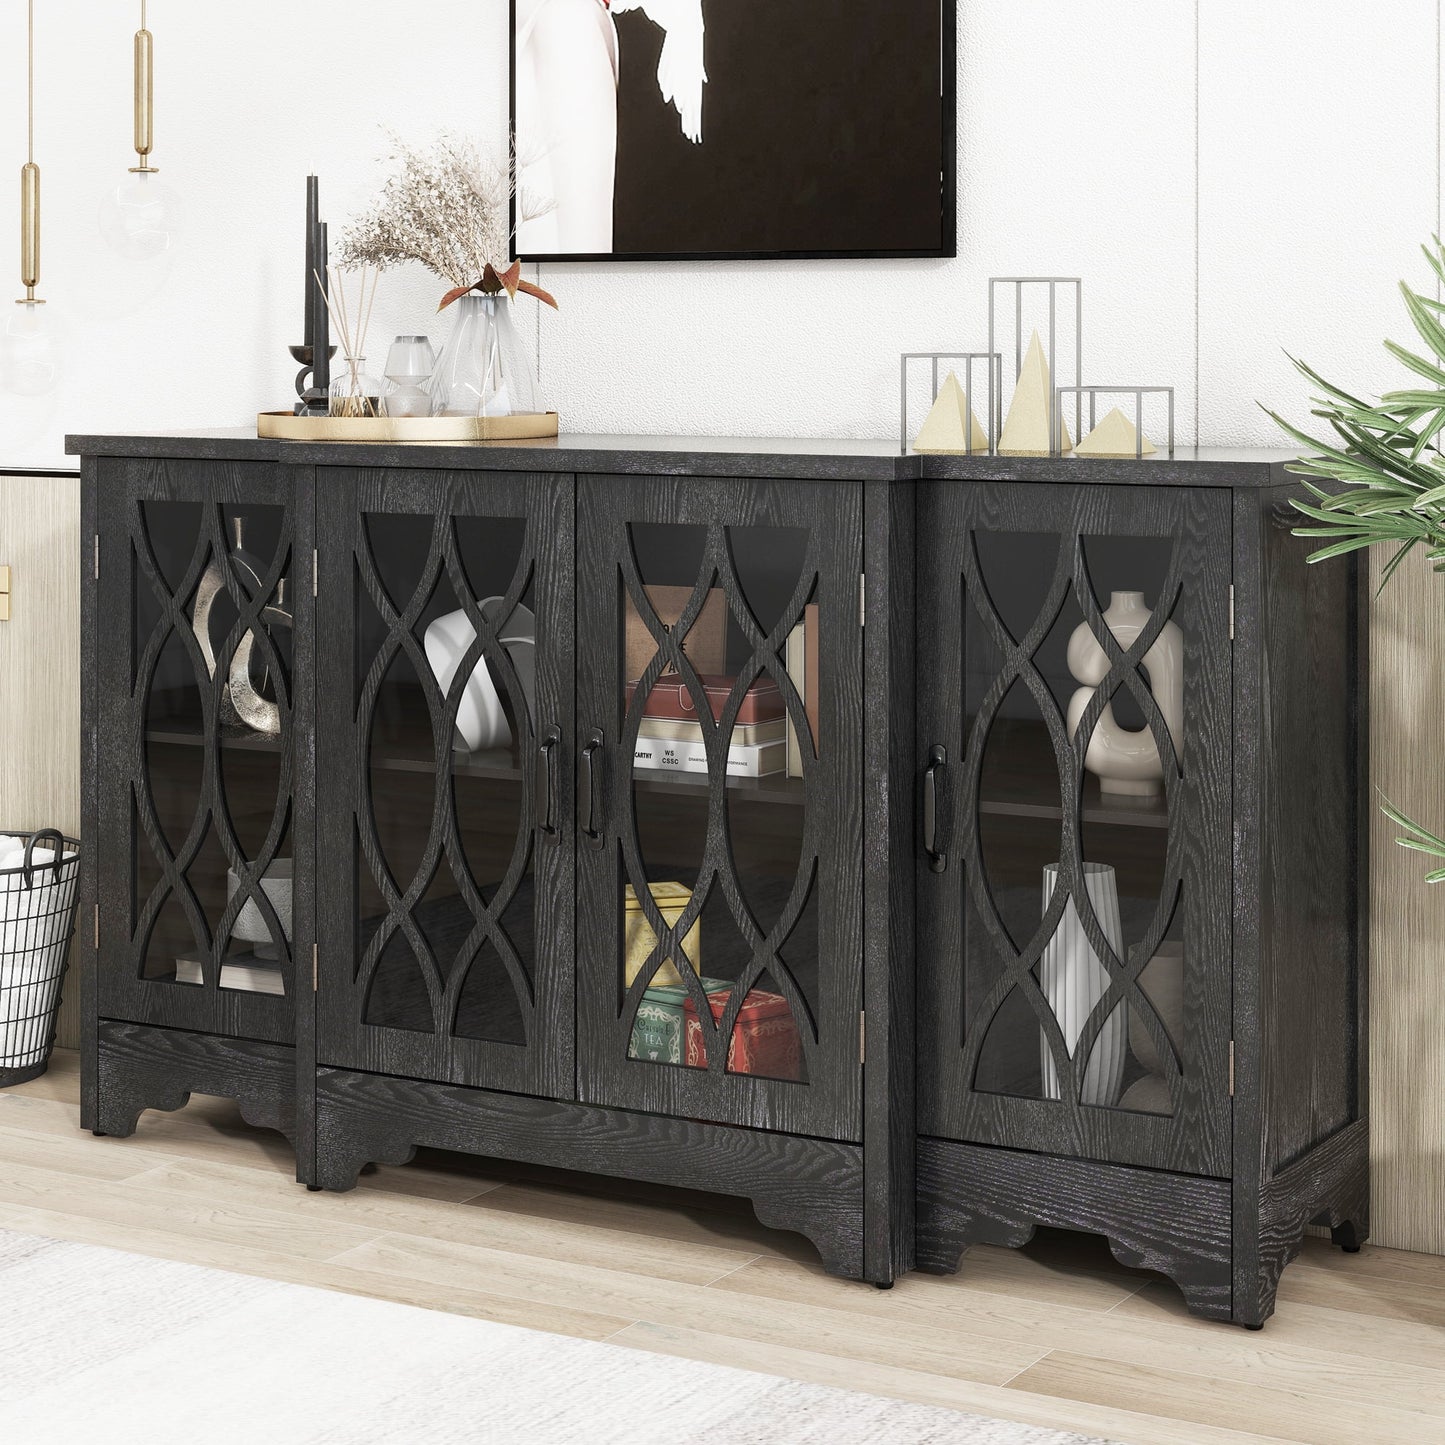 Accent Buffet Sideboard, Atumon Buffet Cabinet with 4 Glass Doors, Wood Buffet Sideboard, Modern Storage Cabinet Furniture for Kitchen Dining Room Living Room, 58"L x 13.4"W x 32"H, Natural